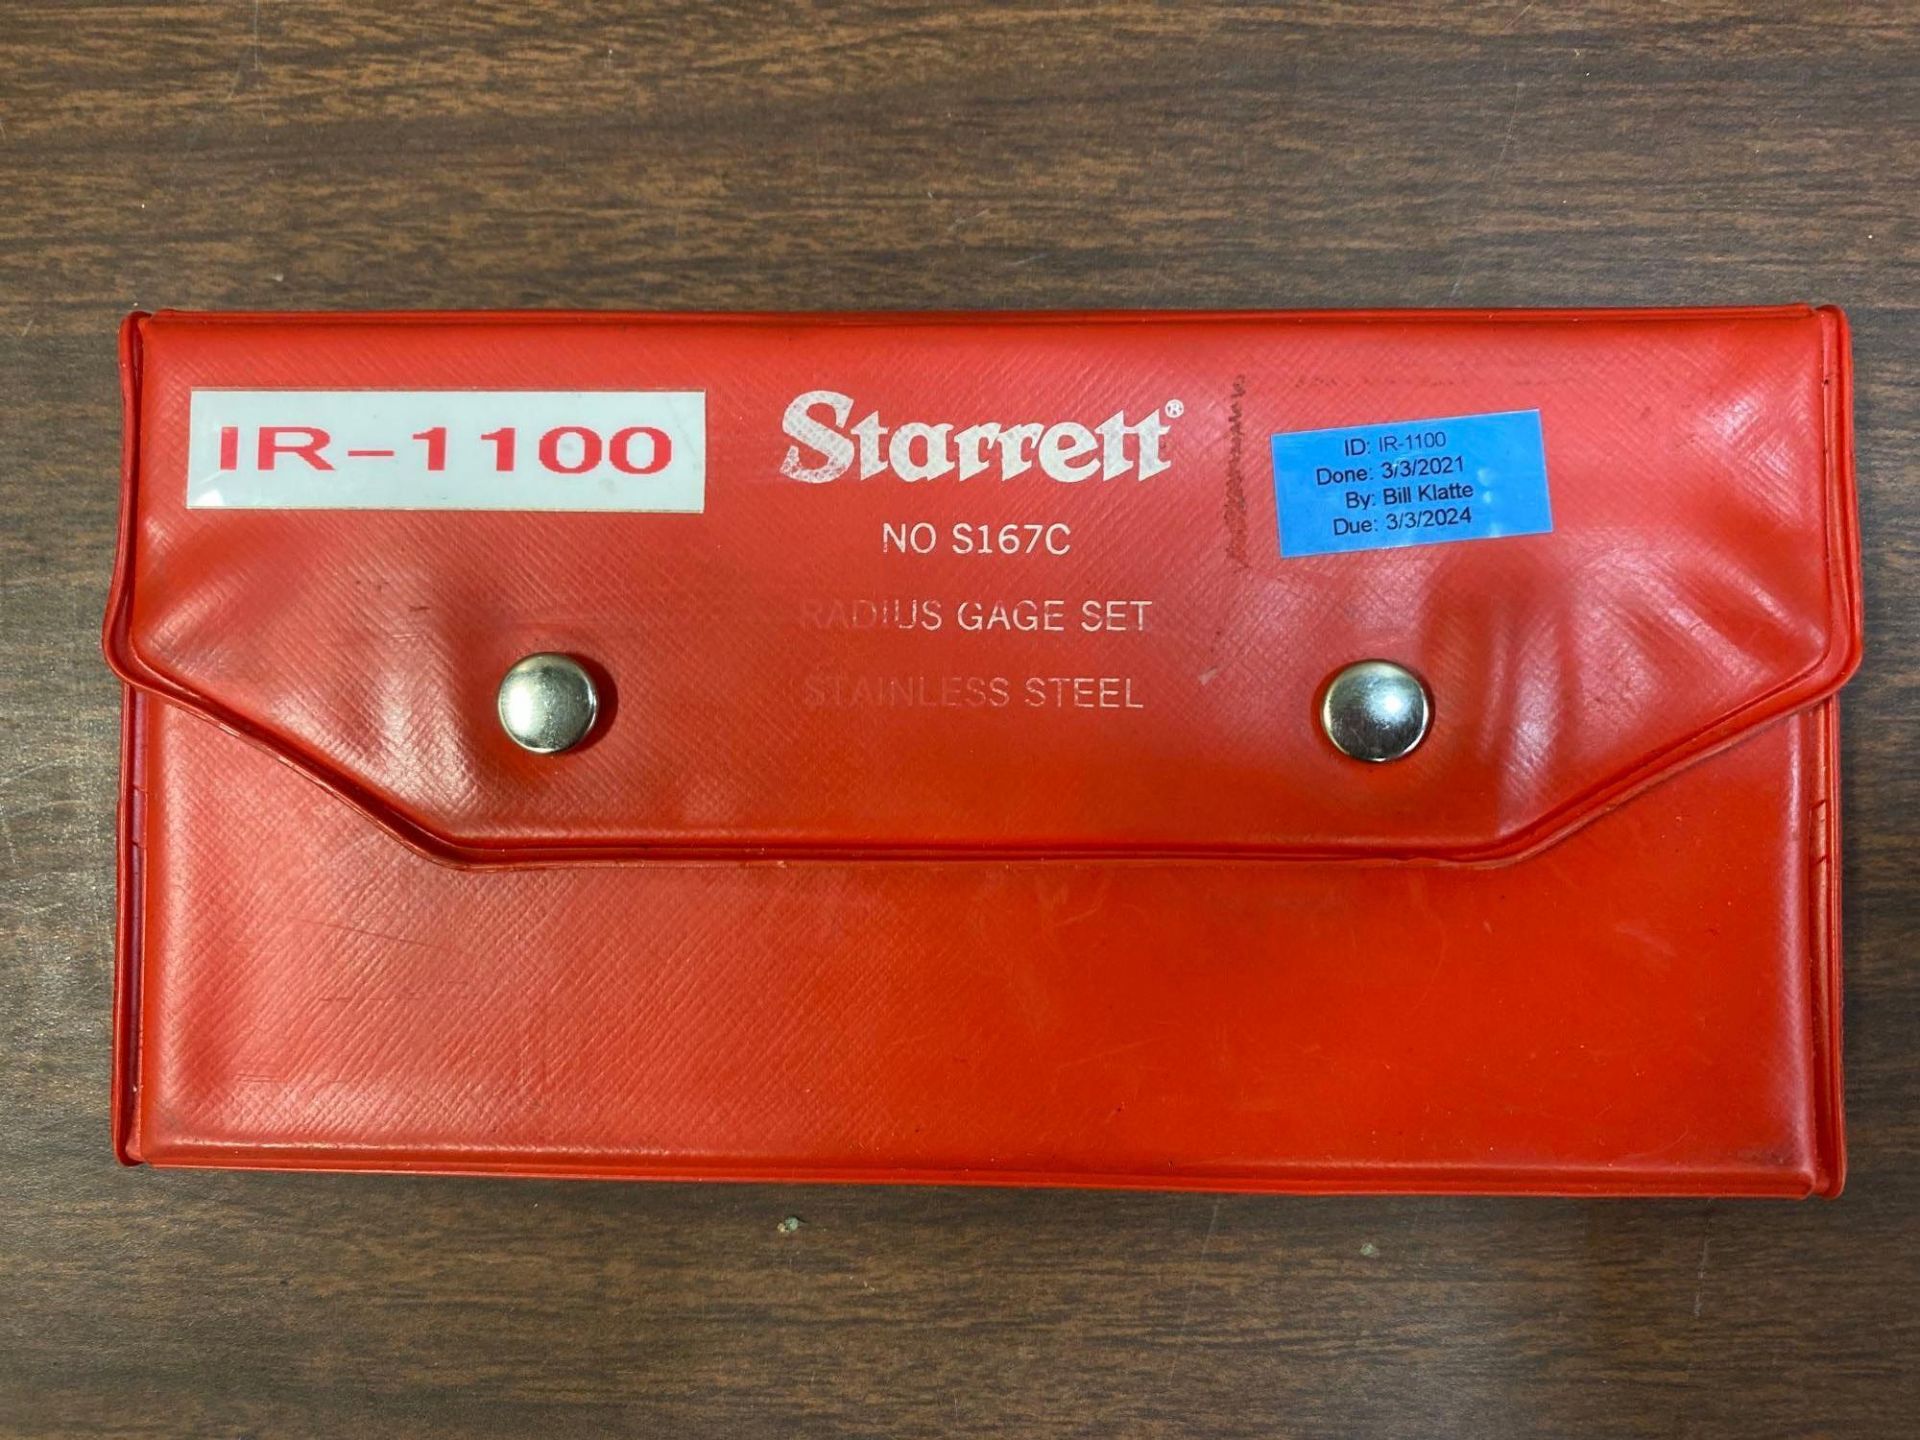 Lot of Starrett Radius Gages and Thickness Gages - Image 13 of 18